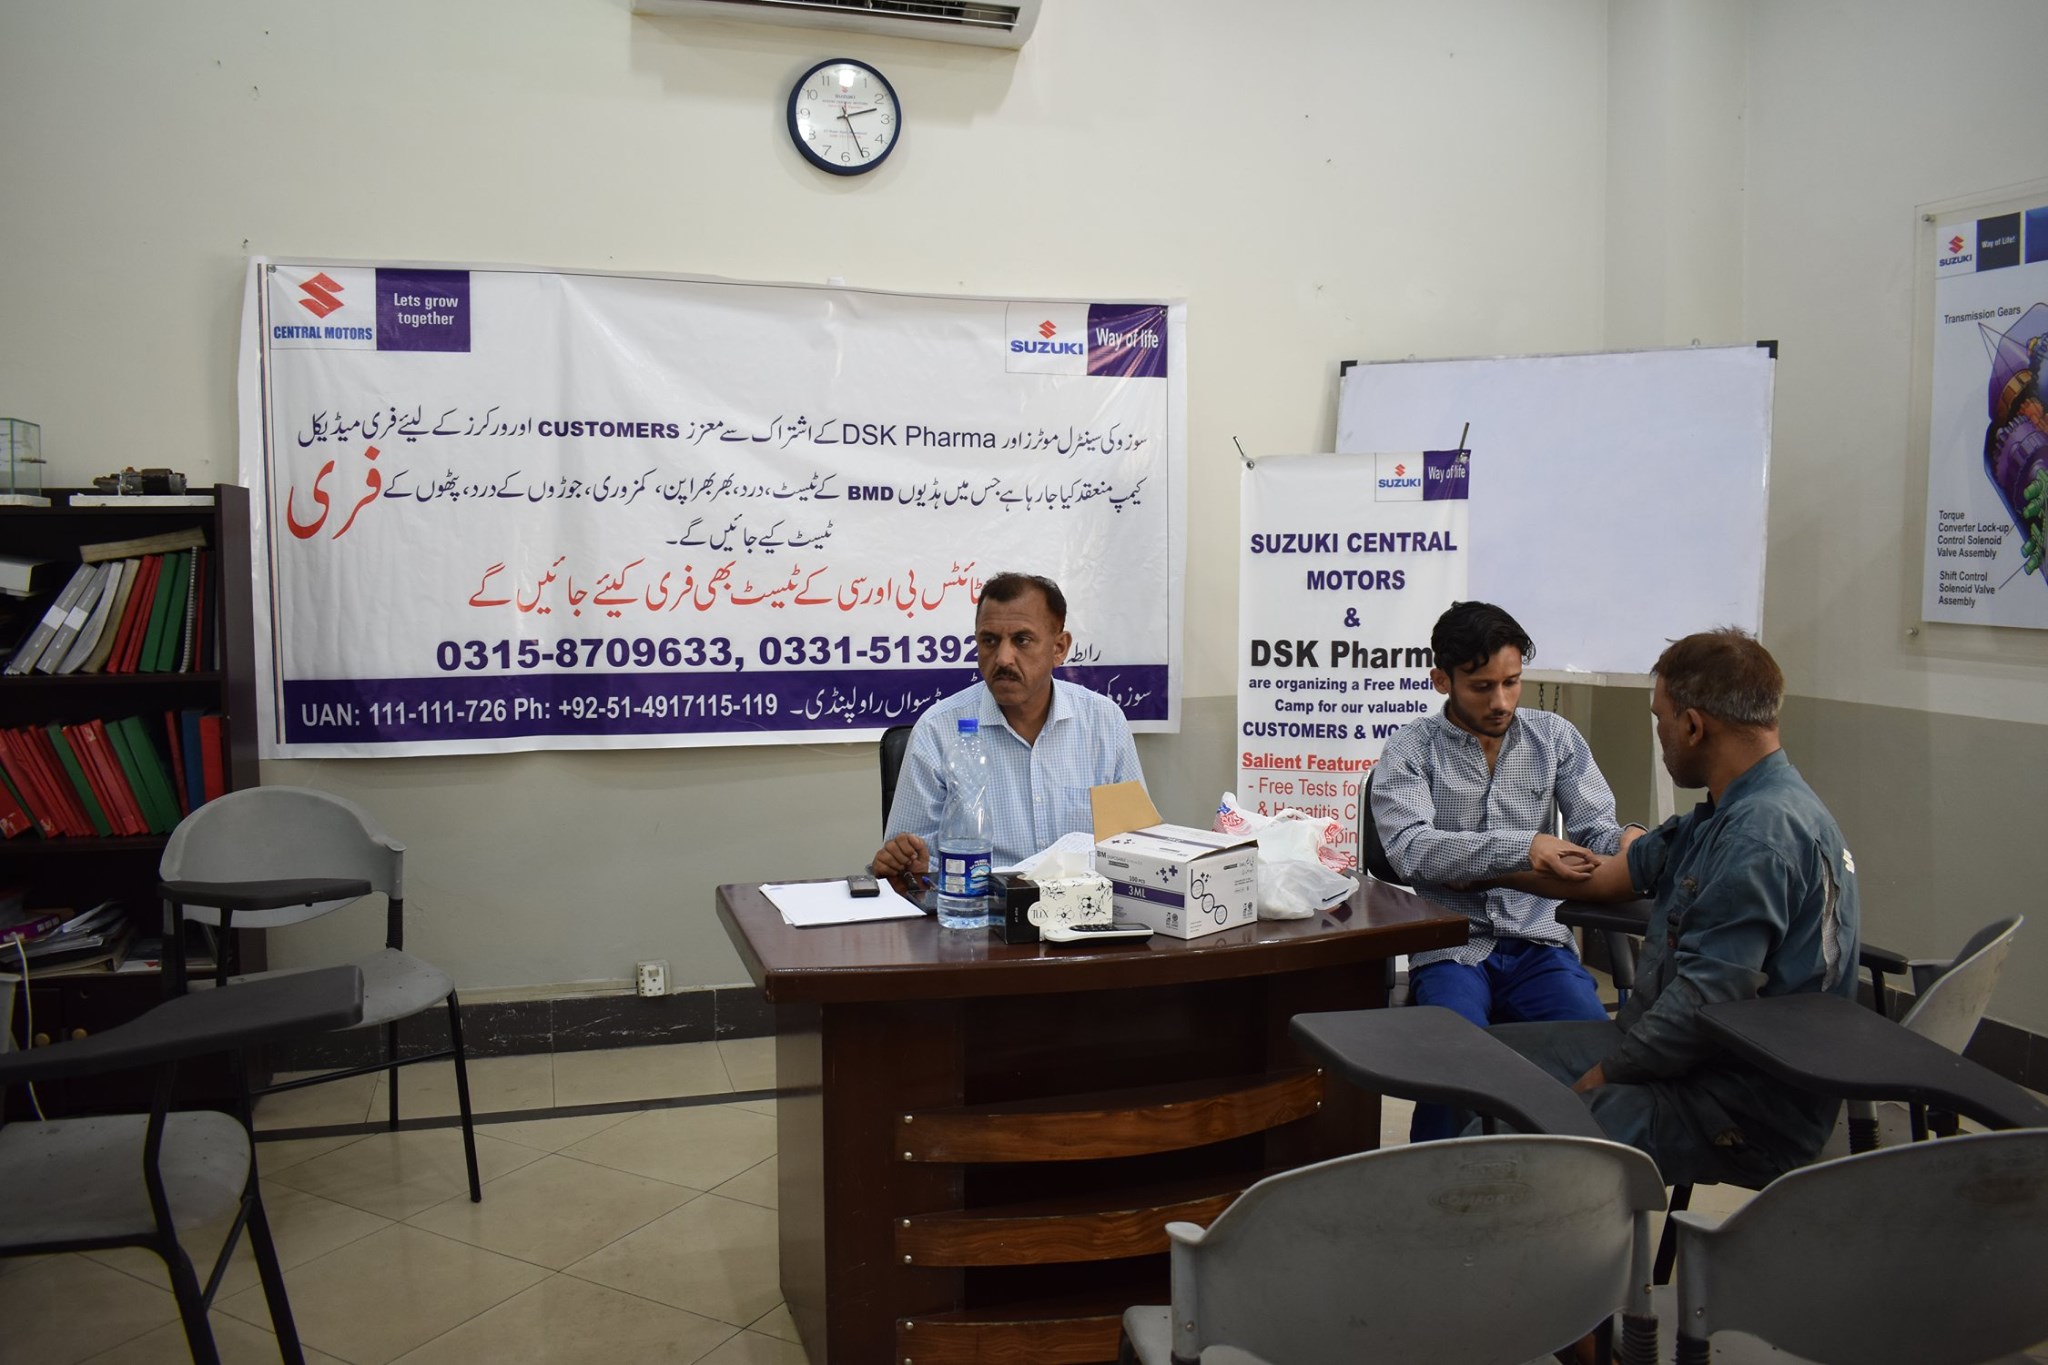 Free Medical Camp For Employees And Customers 29-06-2019